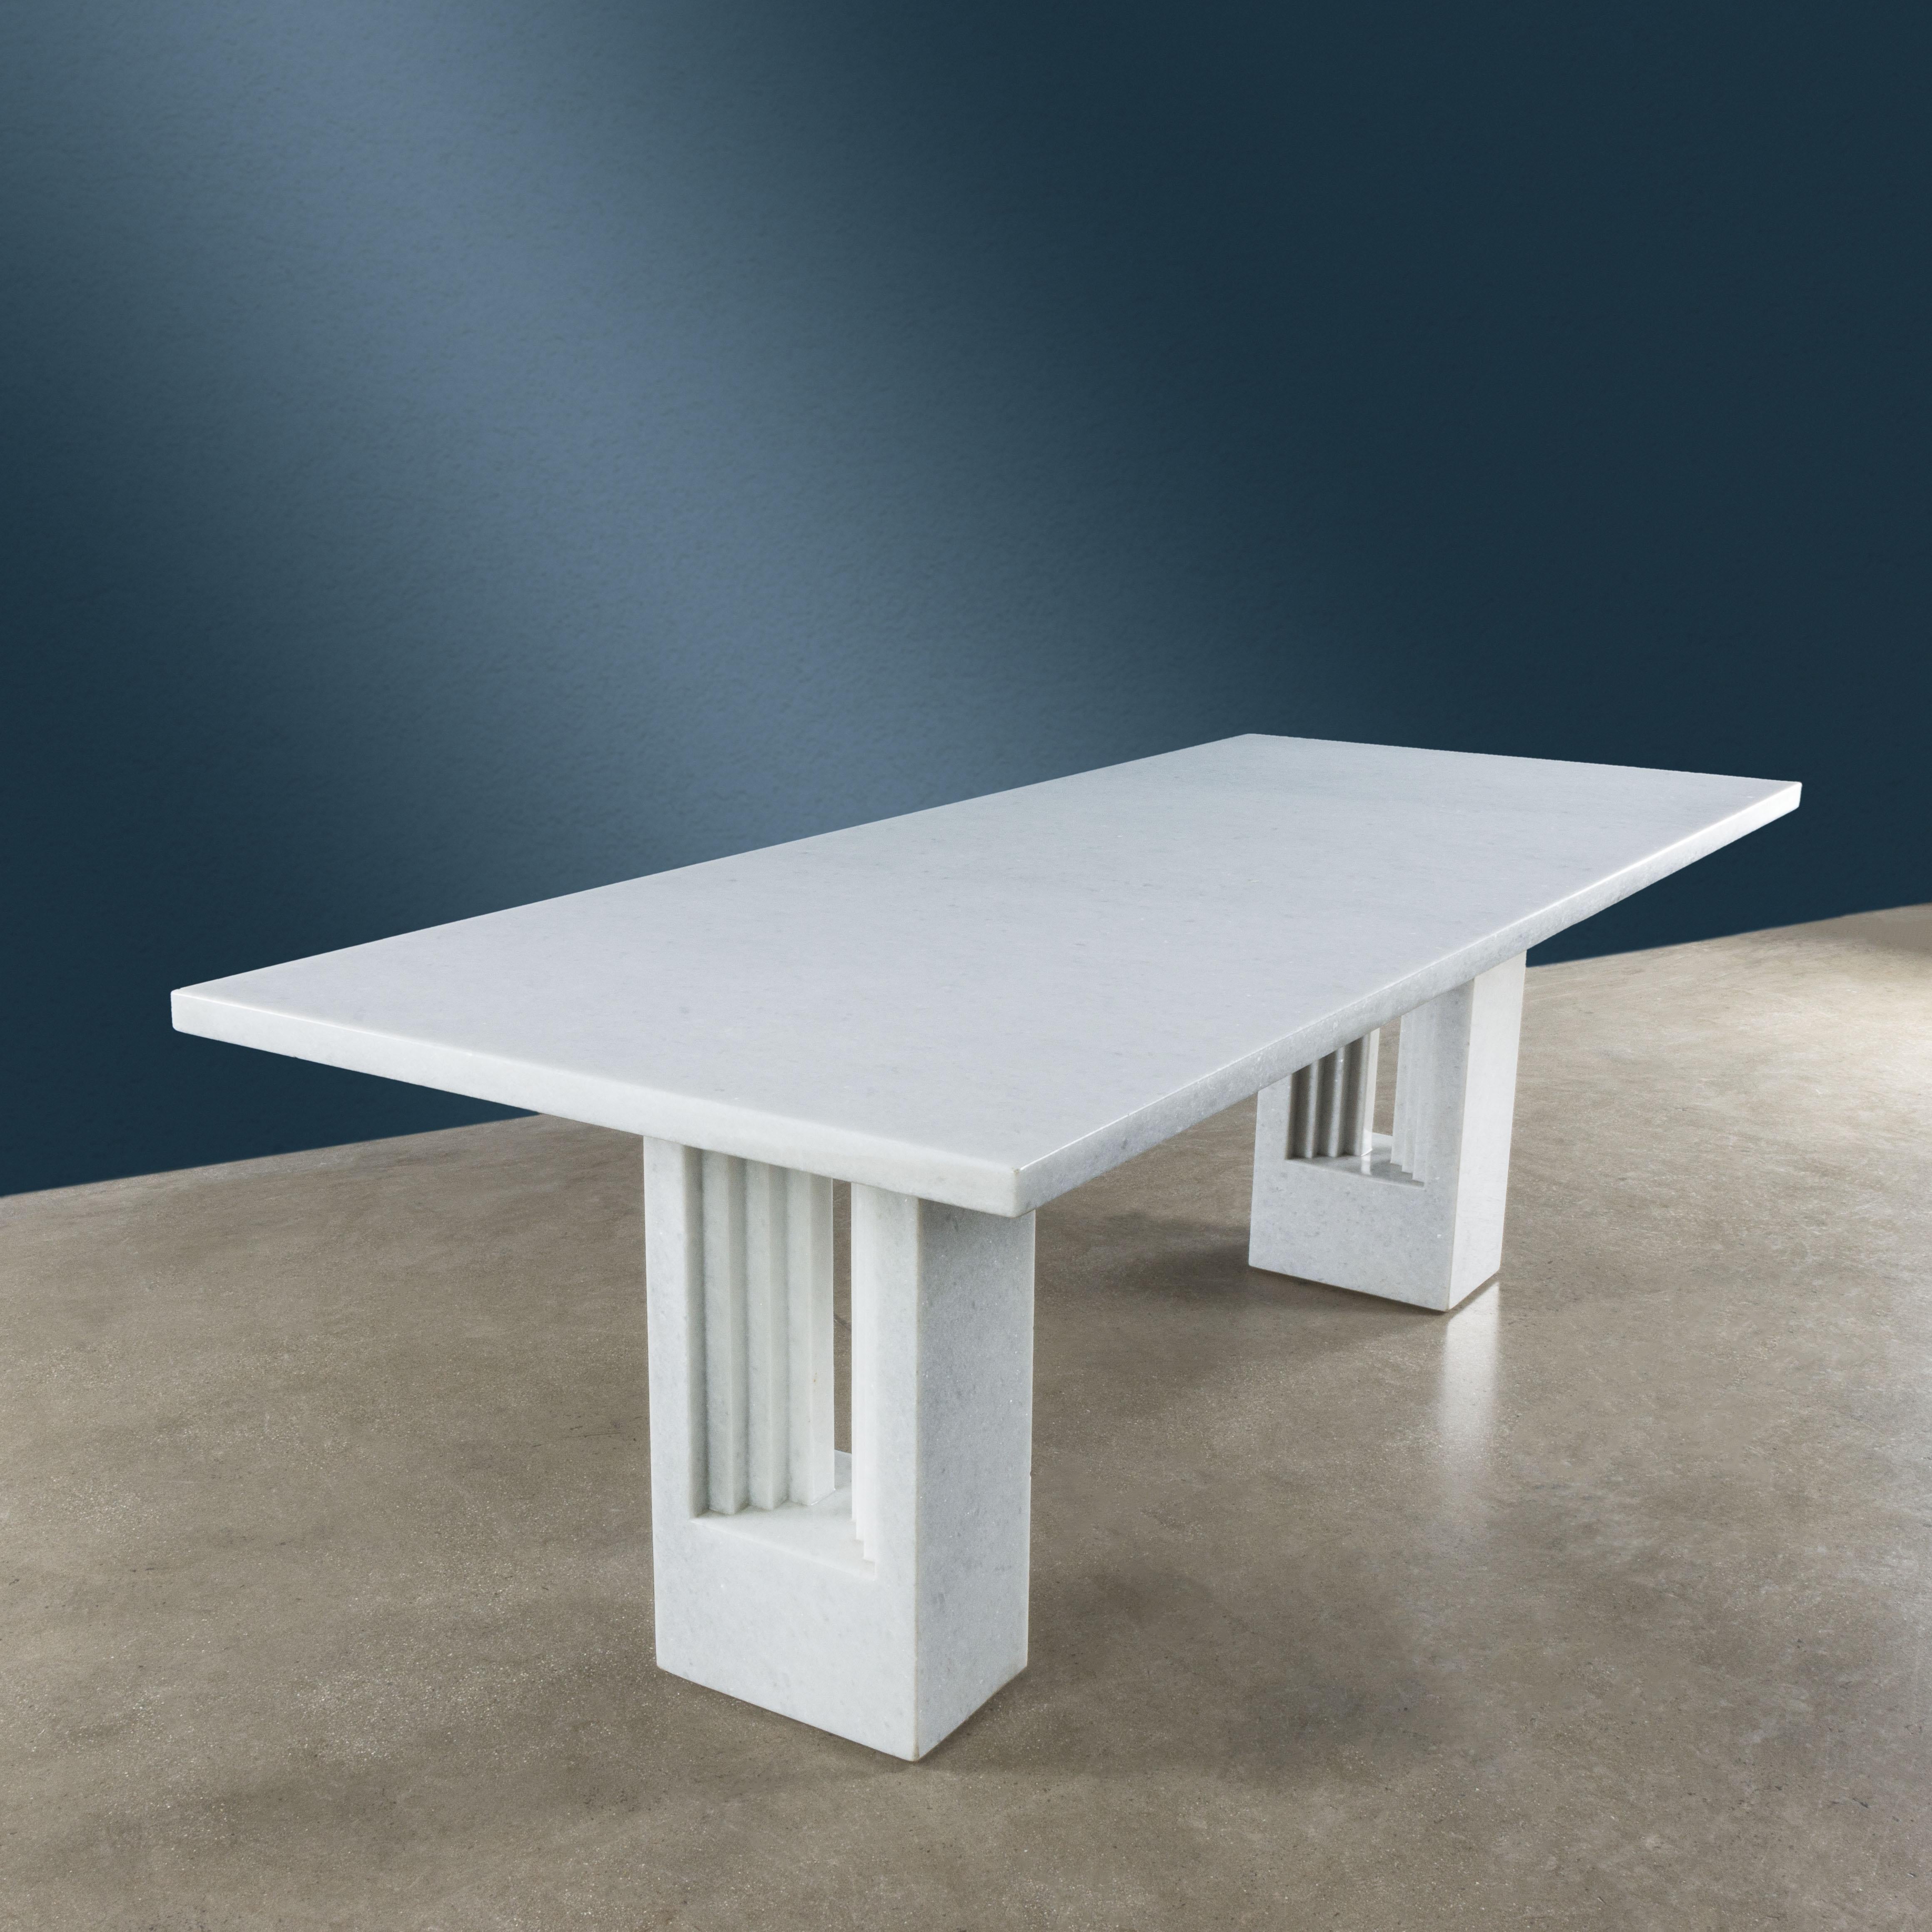 ‘Delfi’ model marble table, produced by Simon since 1969.
The Delfi table is the result of Carlo Scarpa’s reworking of a conceived table
in the 1930s by Marcel Breuer. Specifically, the Venetian designer intervened on the central slots of the